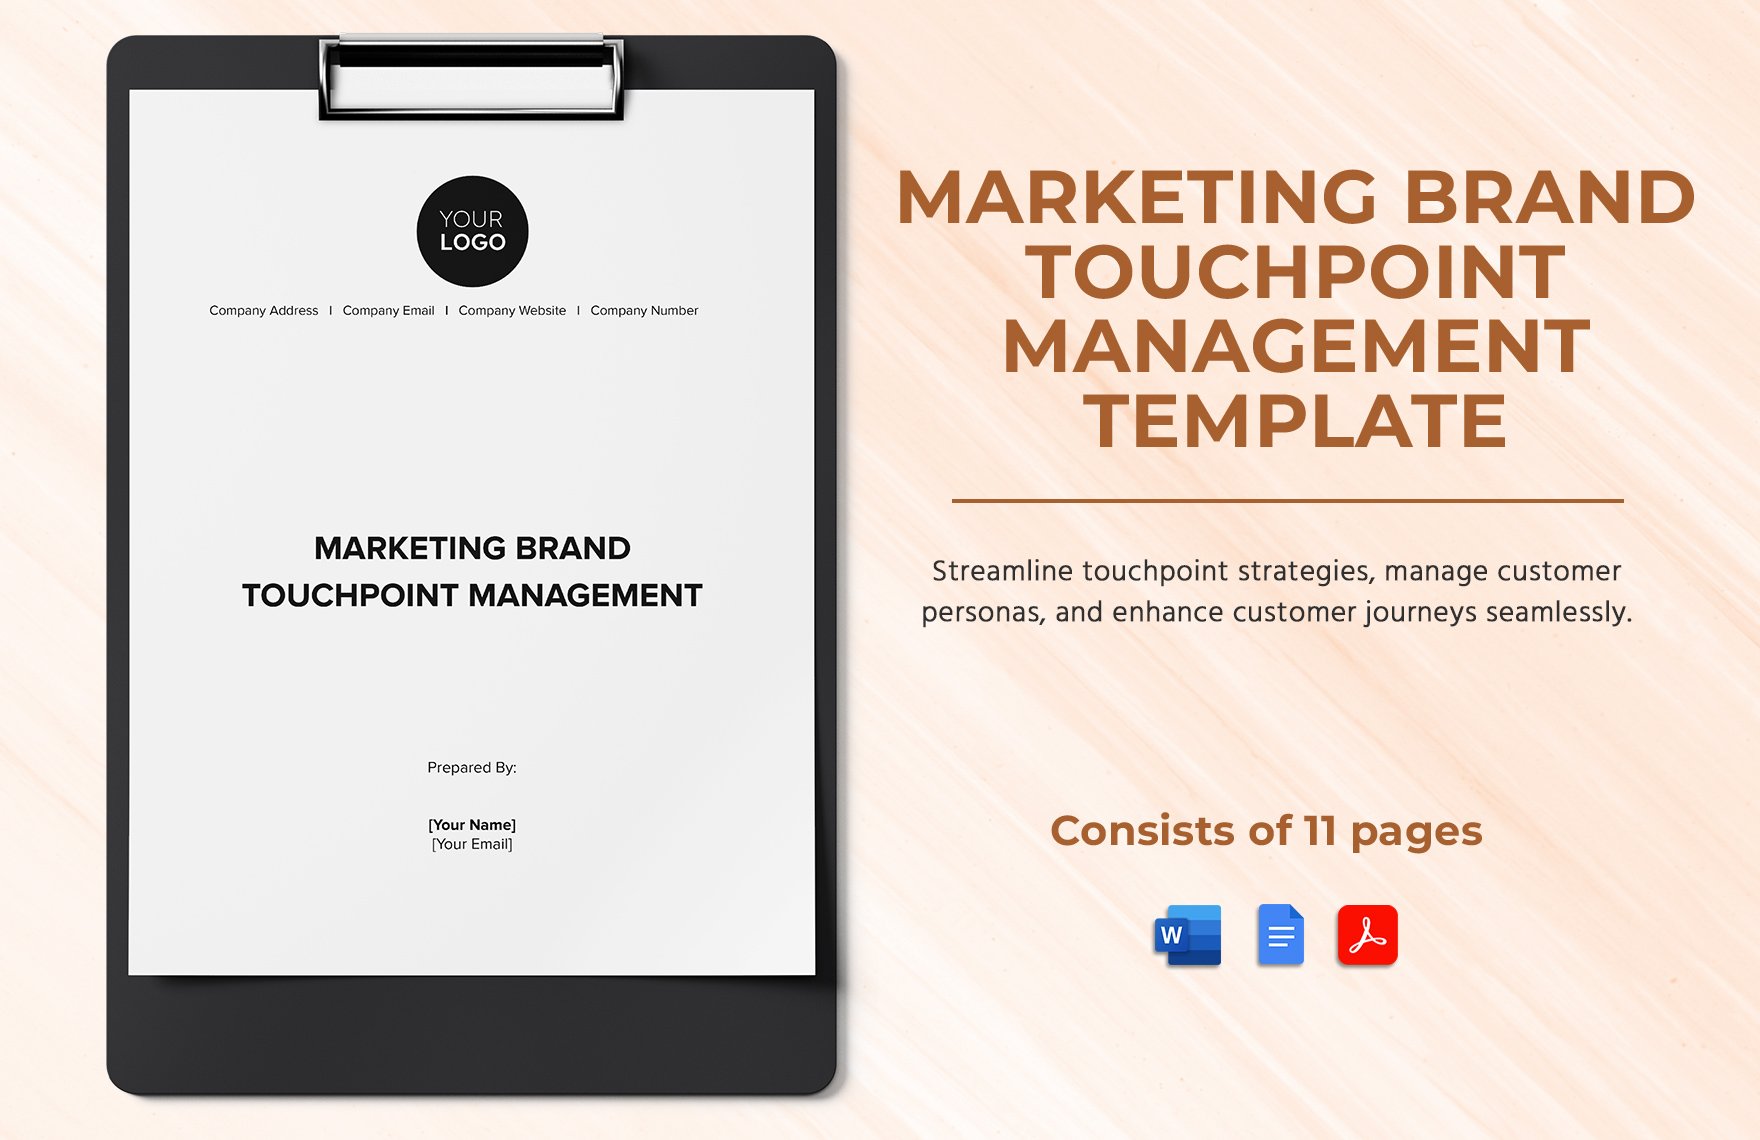 Marketing Brand Touchpoint Management Template